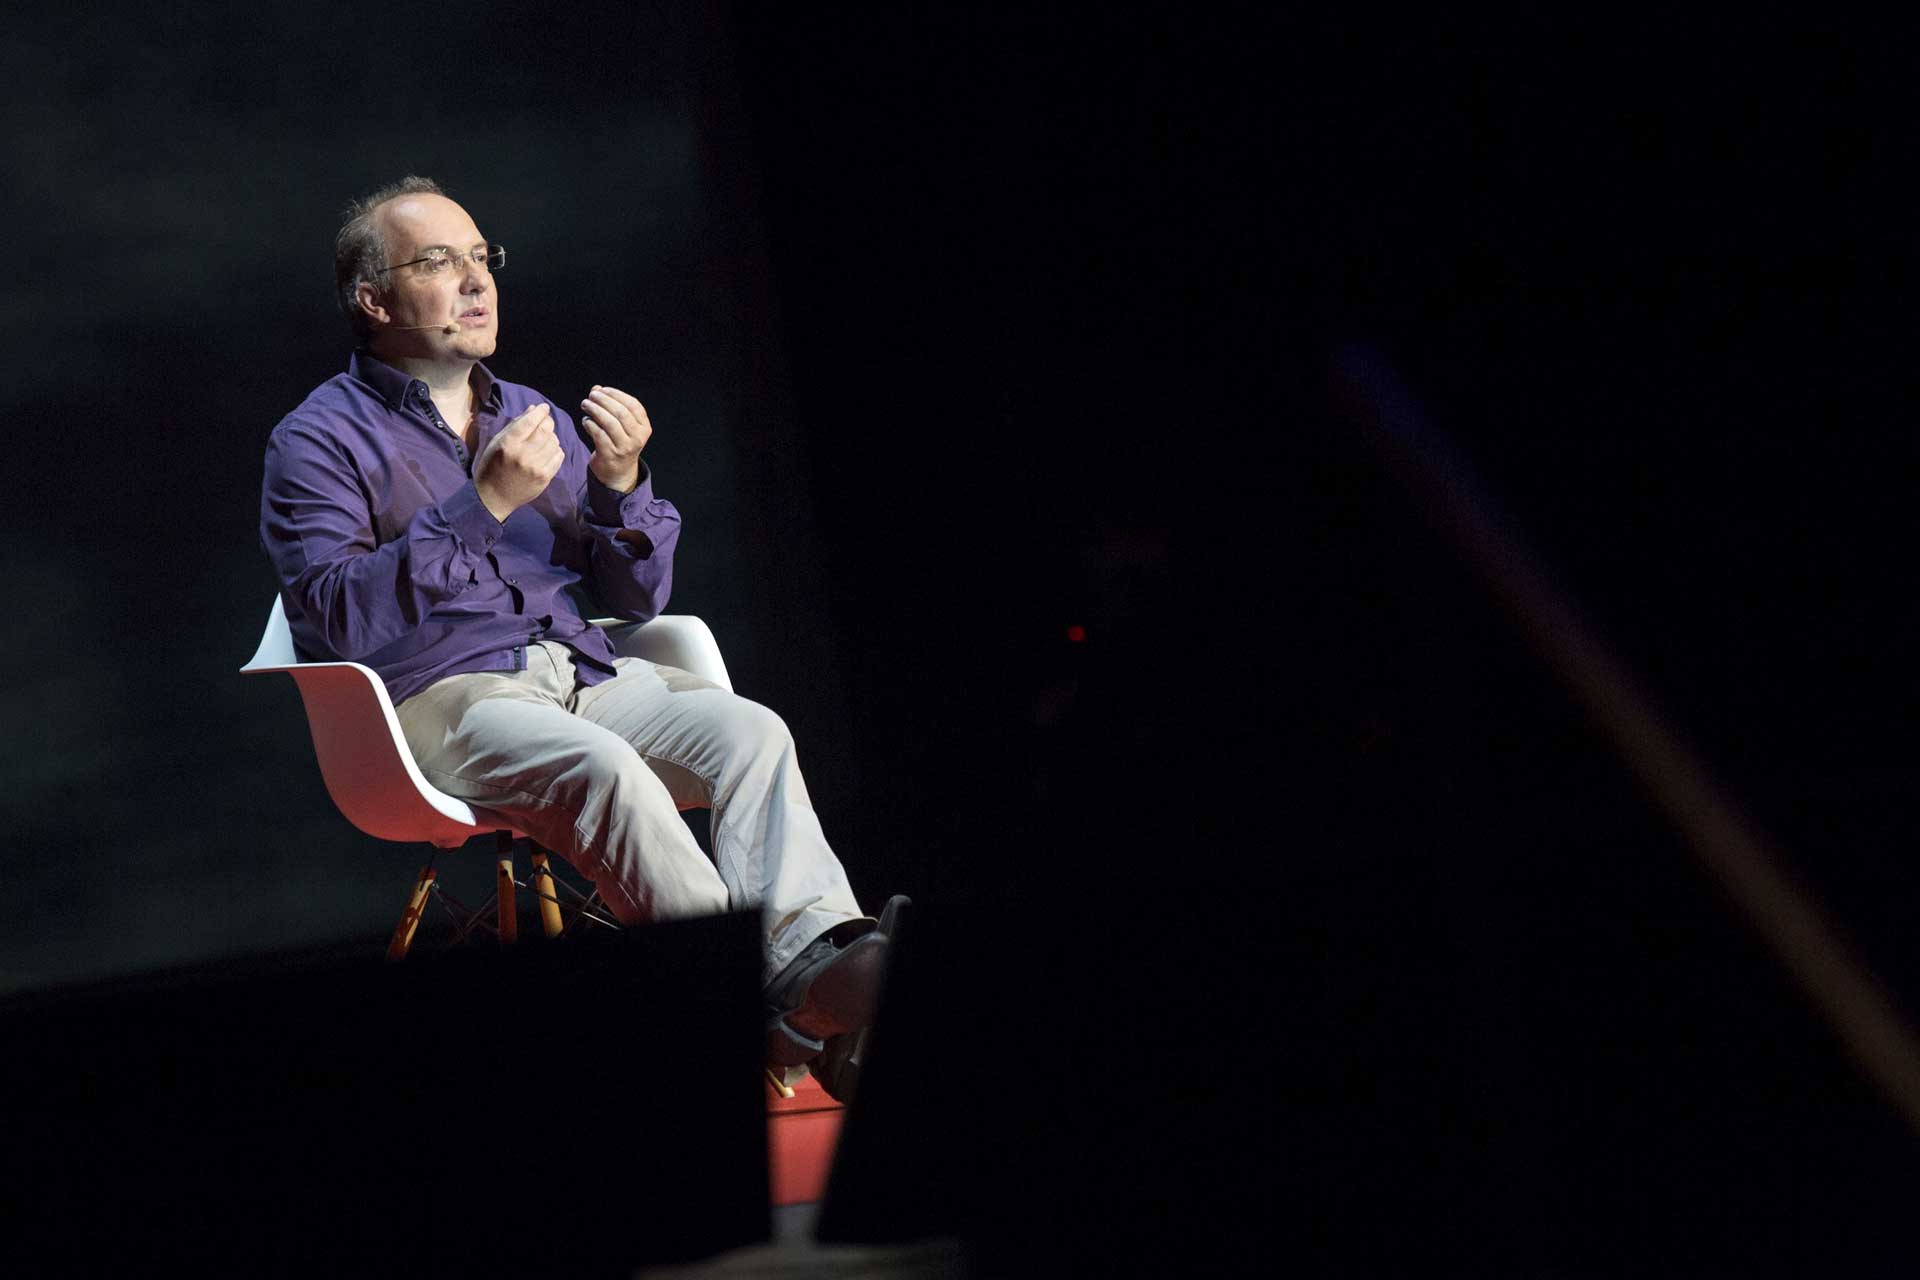 conference-TEDxParis-2014-5.jpg